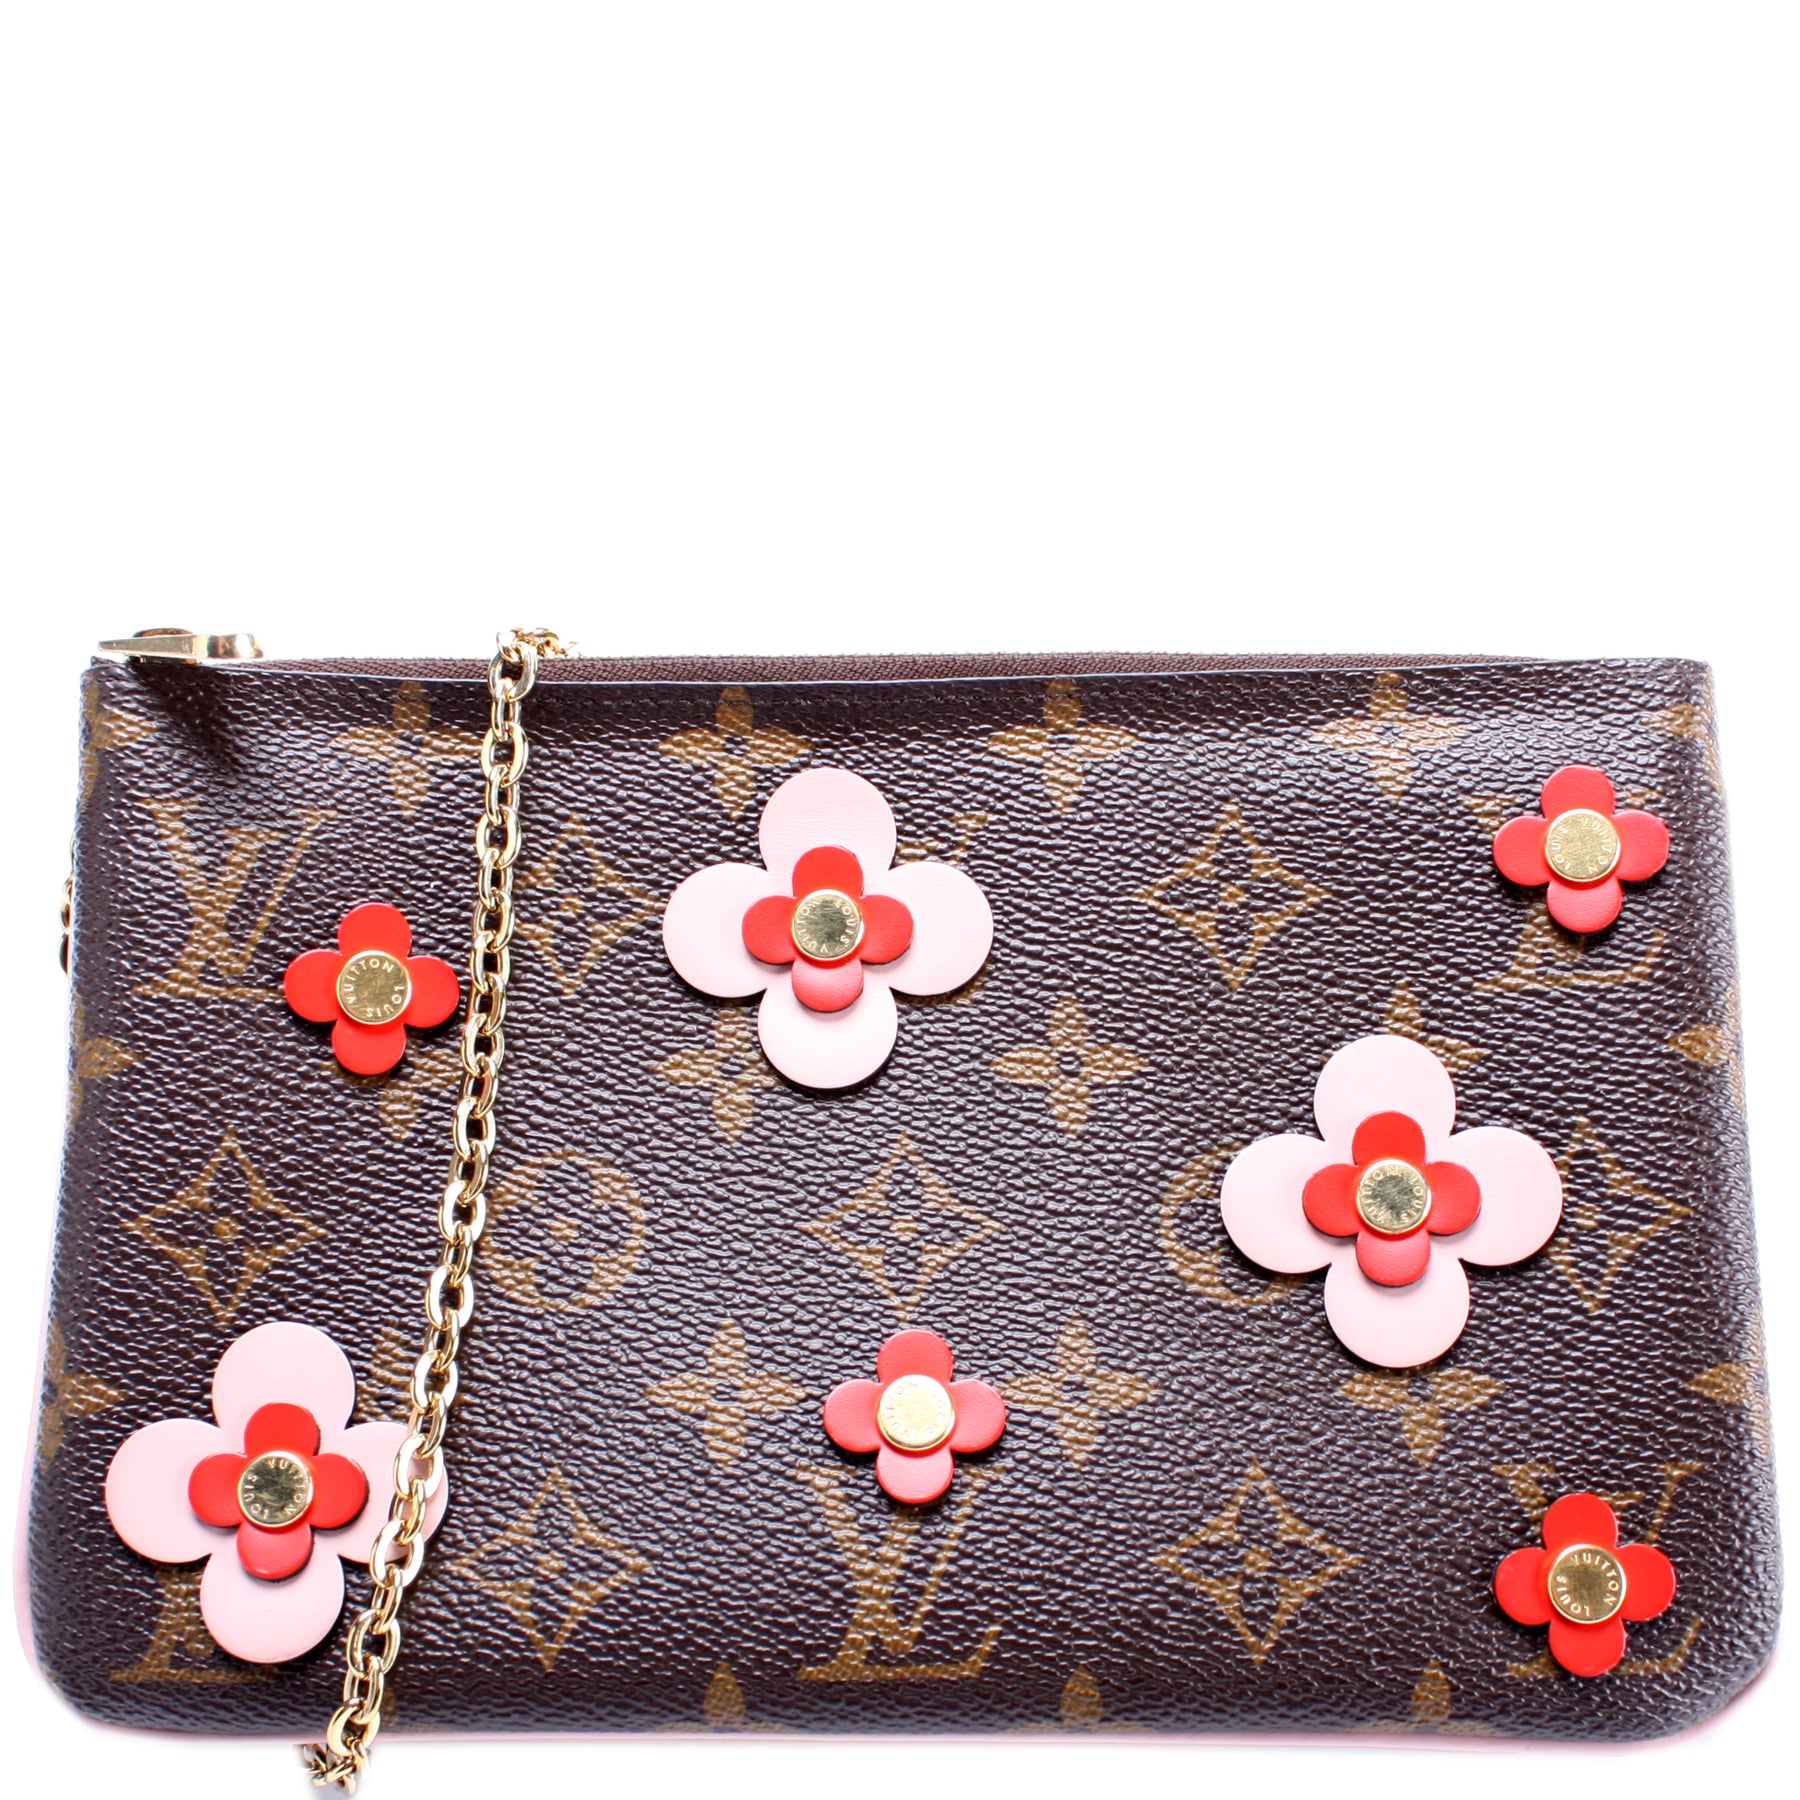 lv bag with flowers